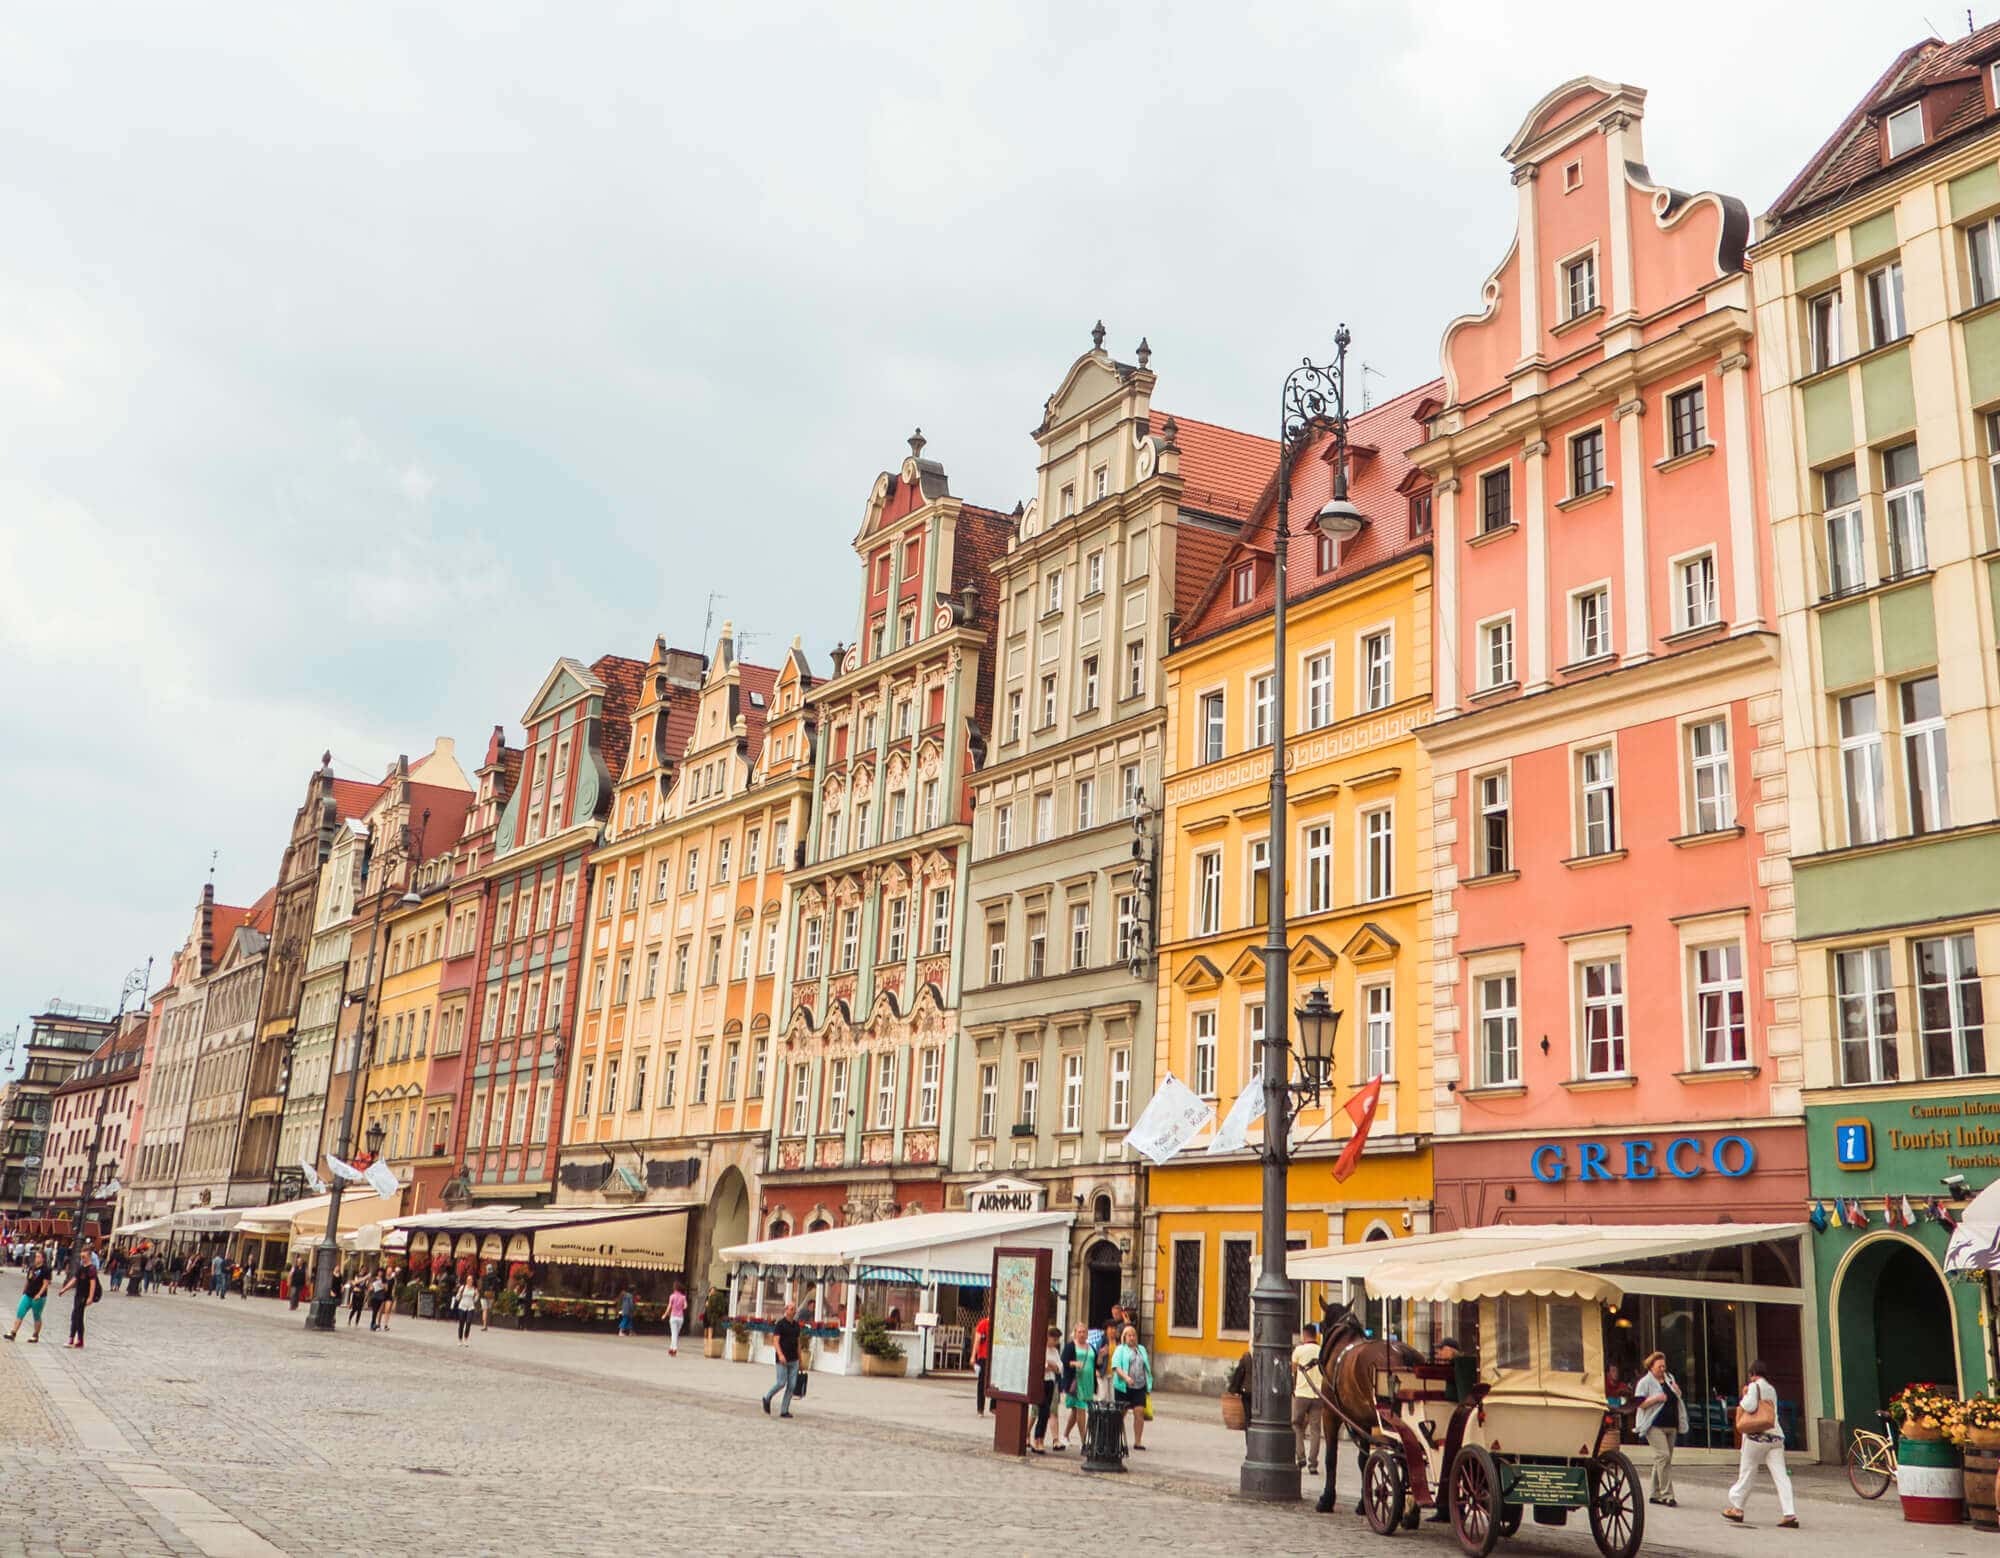 A row of colorful town houses along the main square in Wroclaw, one of the reasons to visit Poland.